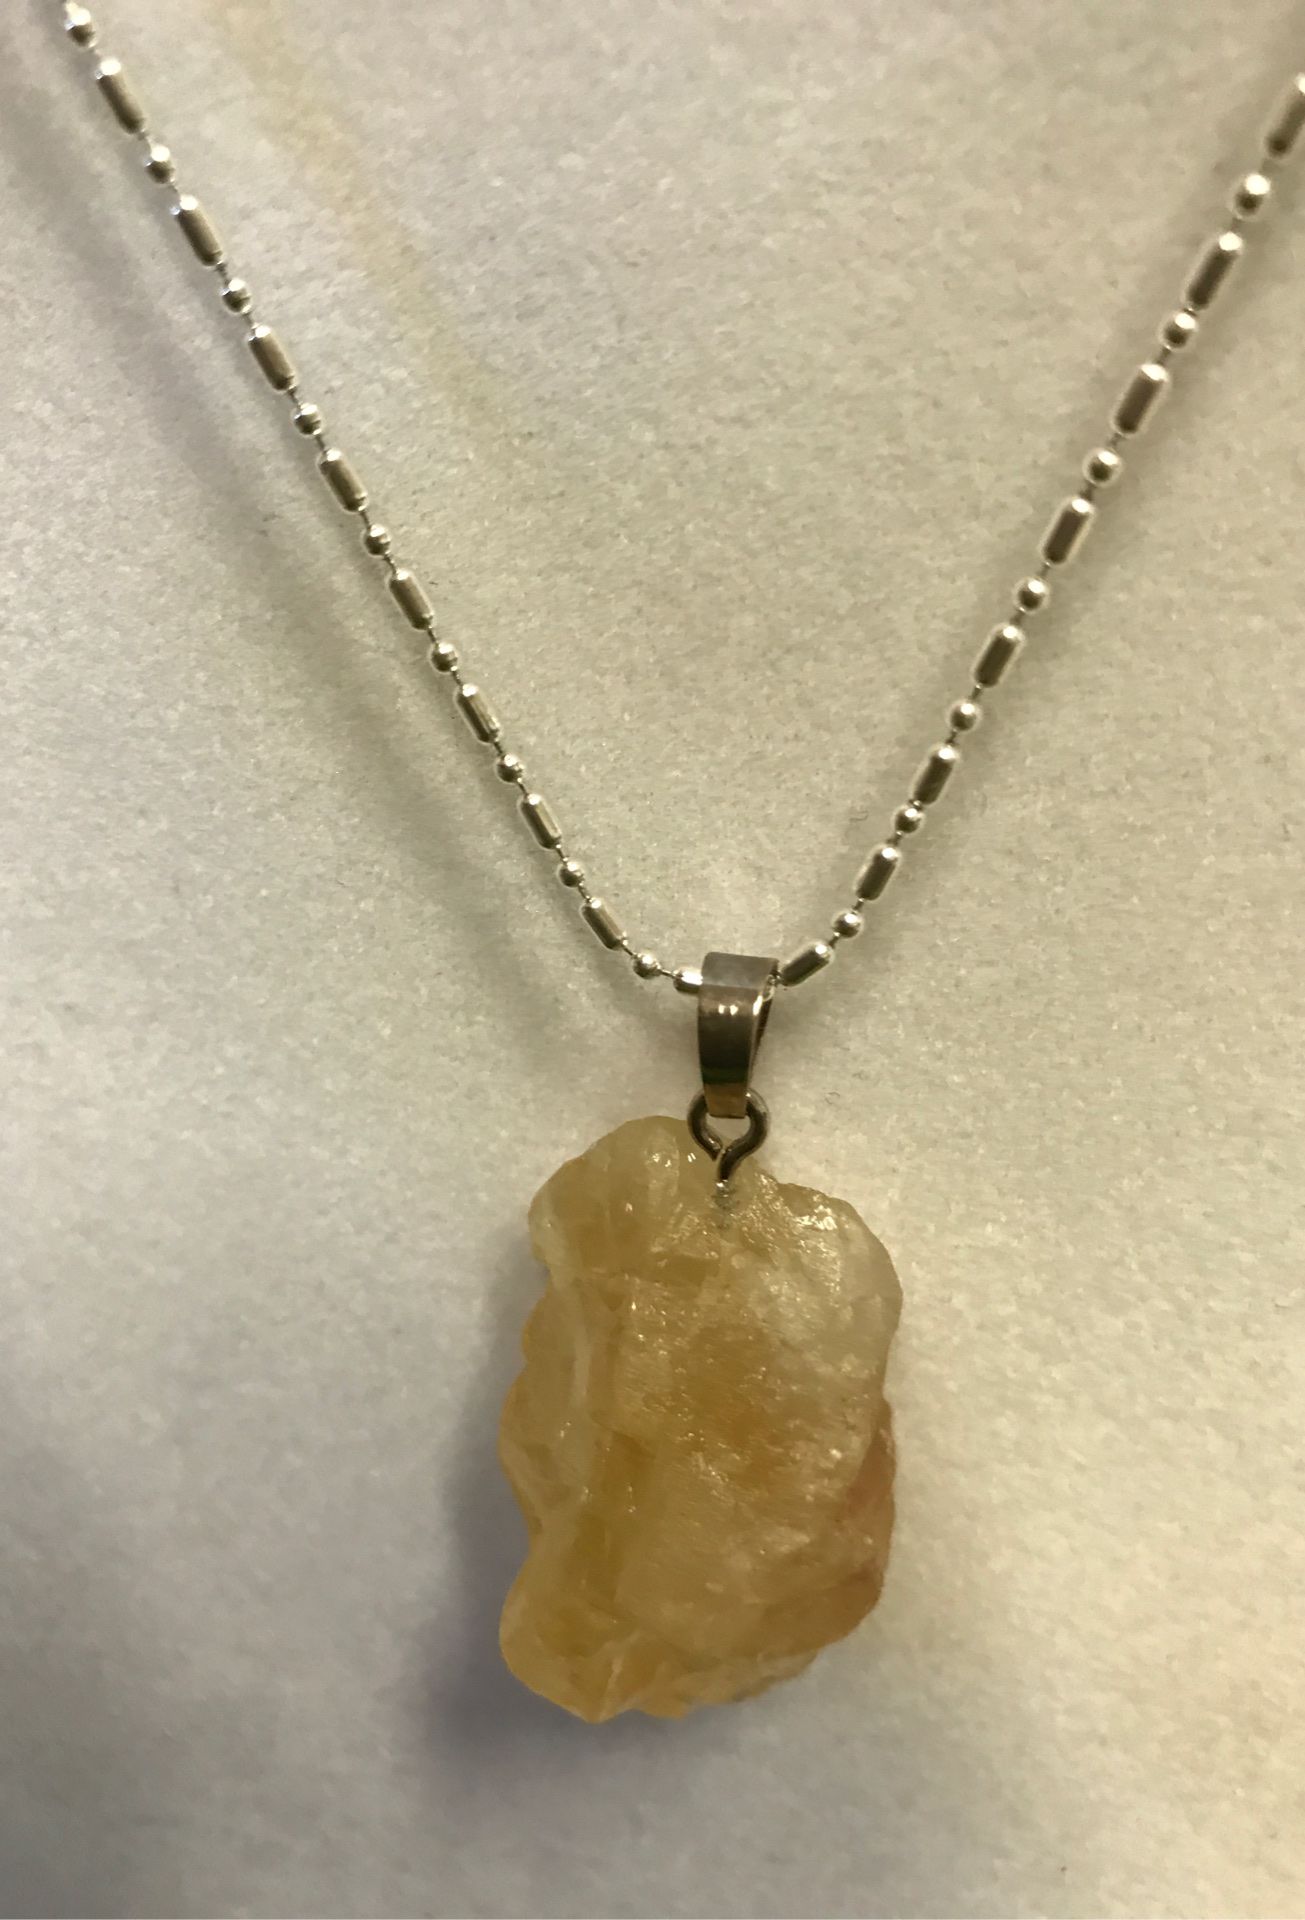 Citrine raw stone pendant with sterling silver chain. 18 inches in length